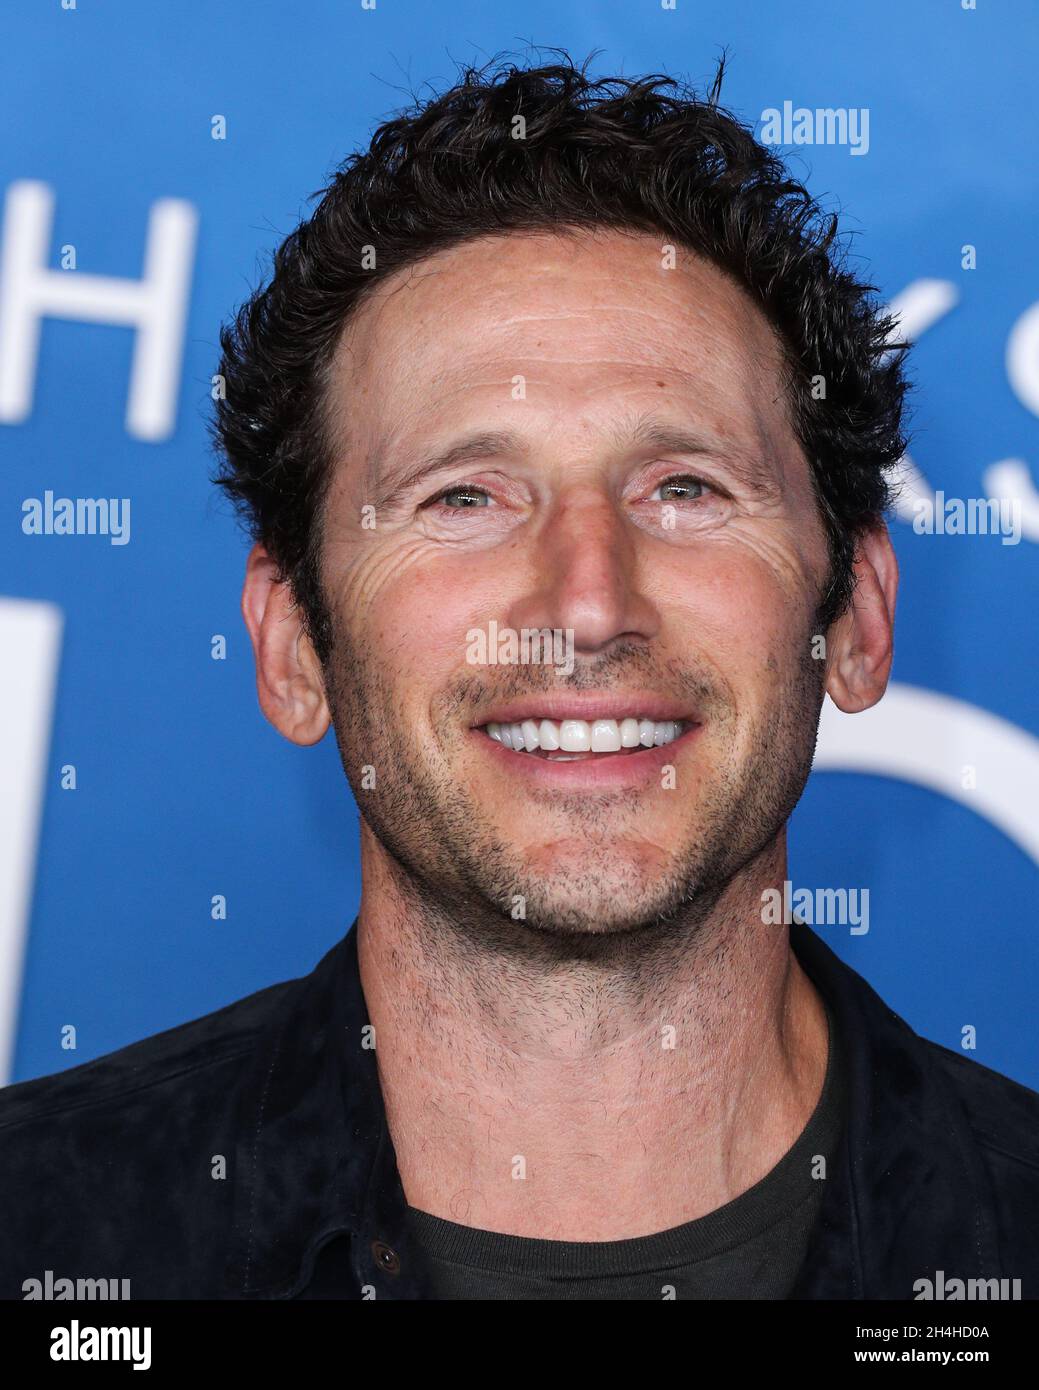 LOS ANGELES, CA - August 16, 1999: Actor MARK FEUERSTEIN at the